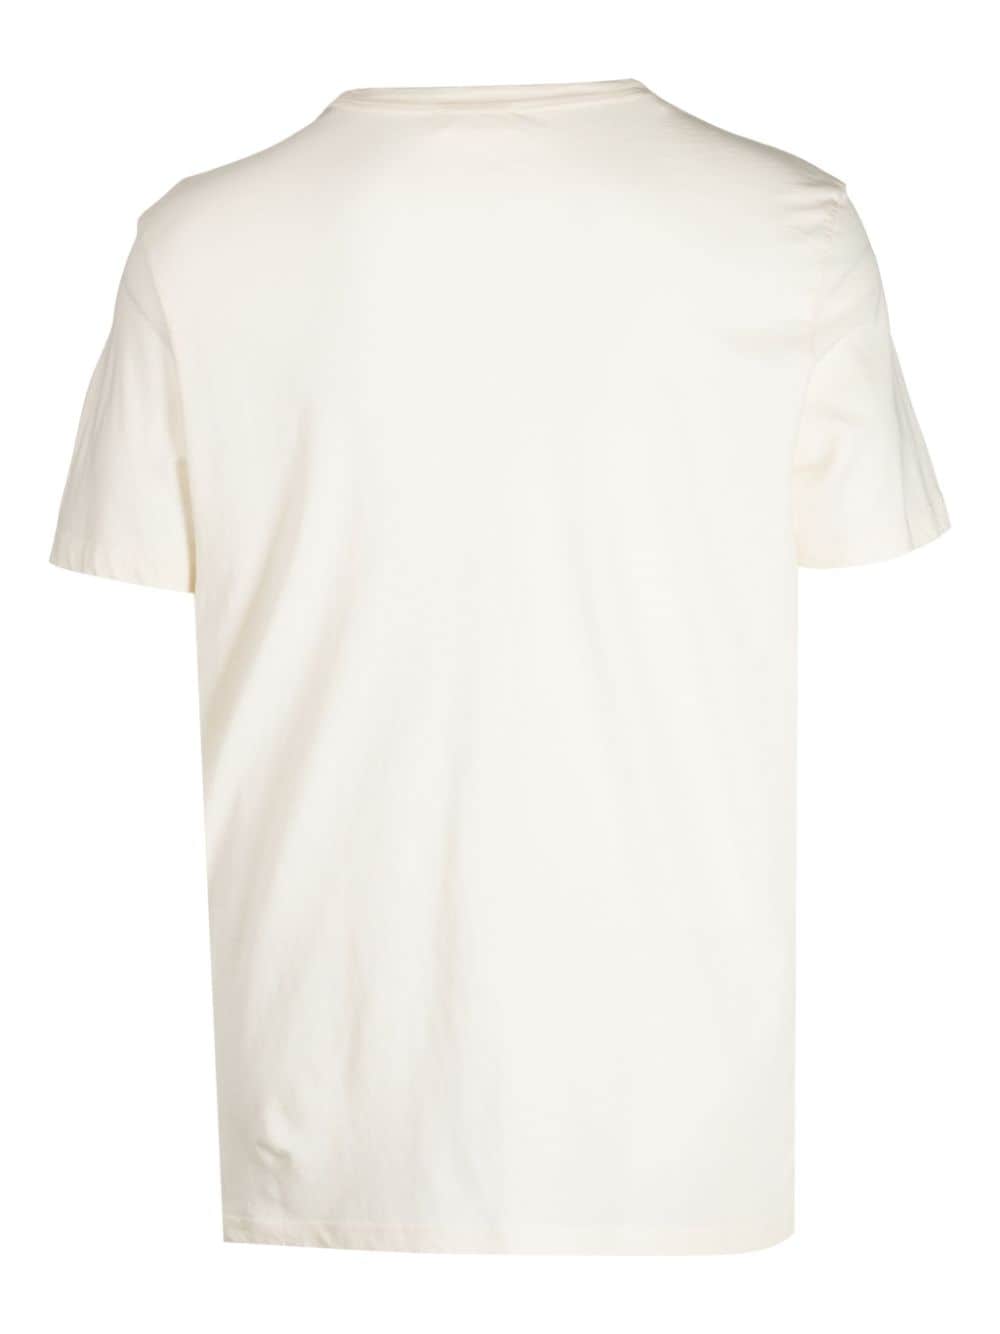 7 For All Mankind T-shirt met ronde hals - Wit